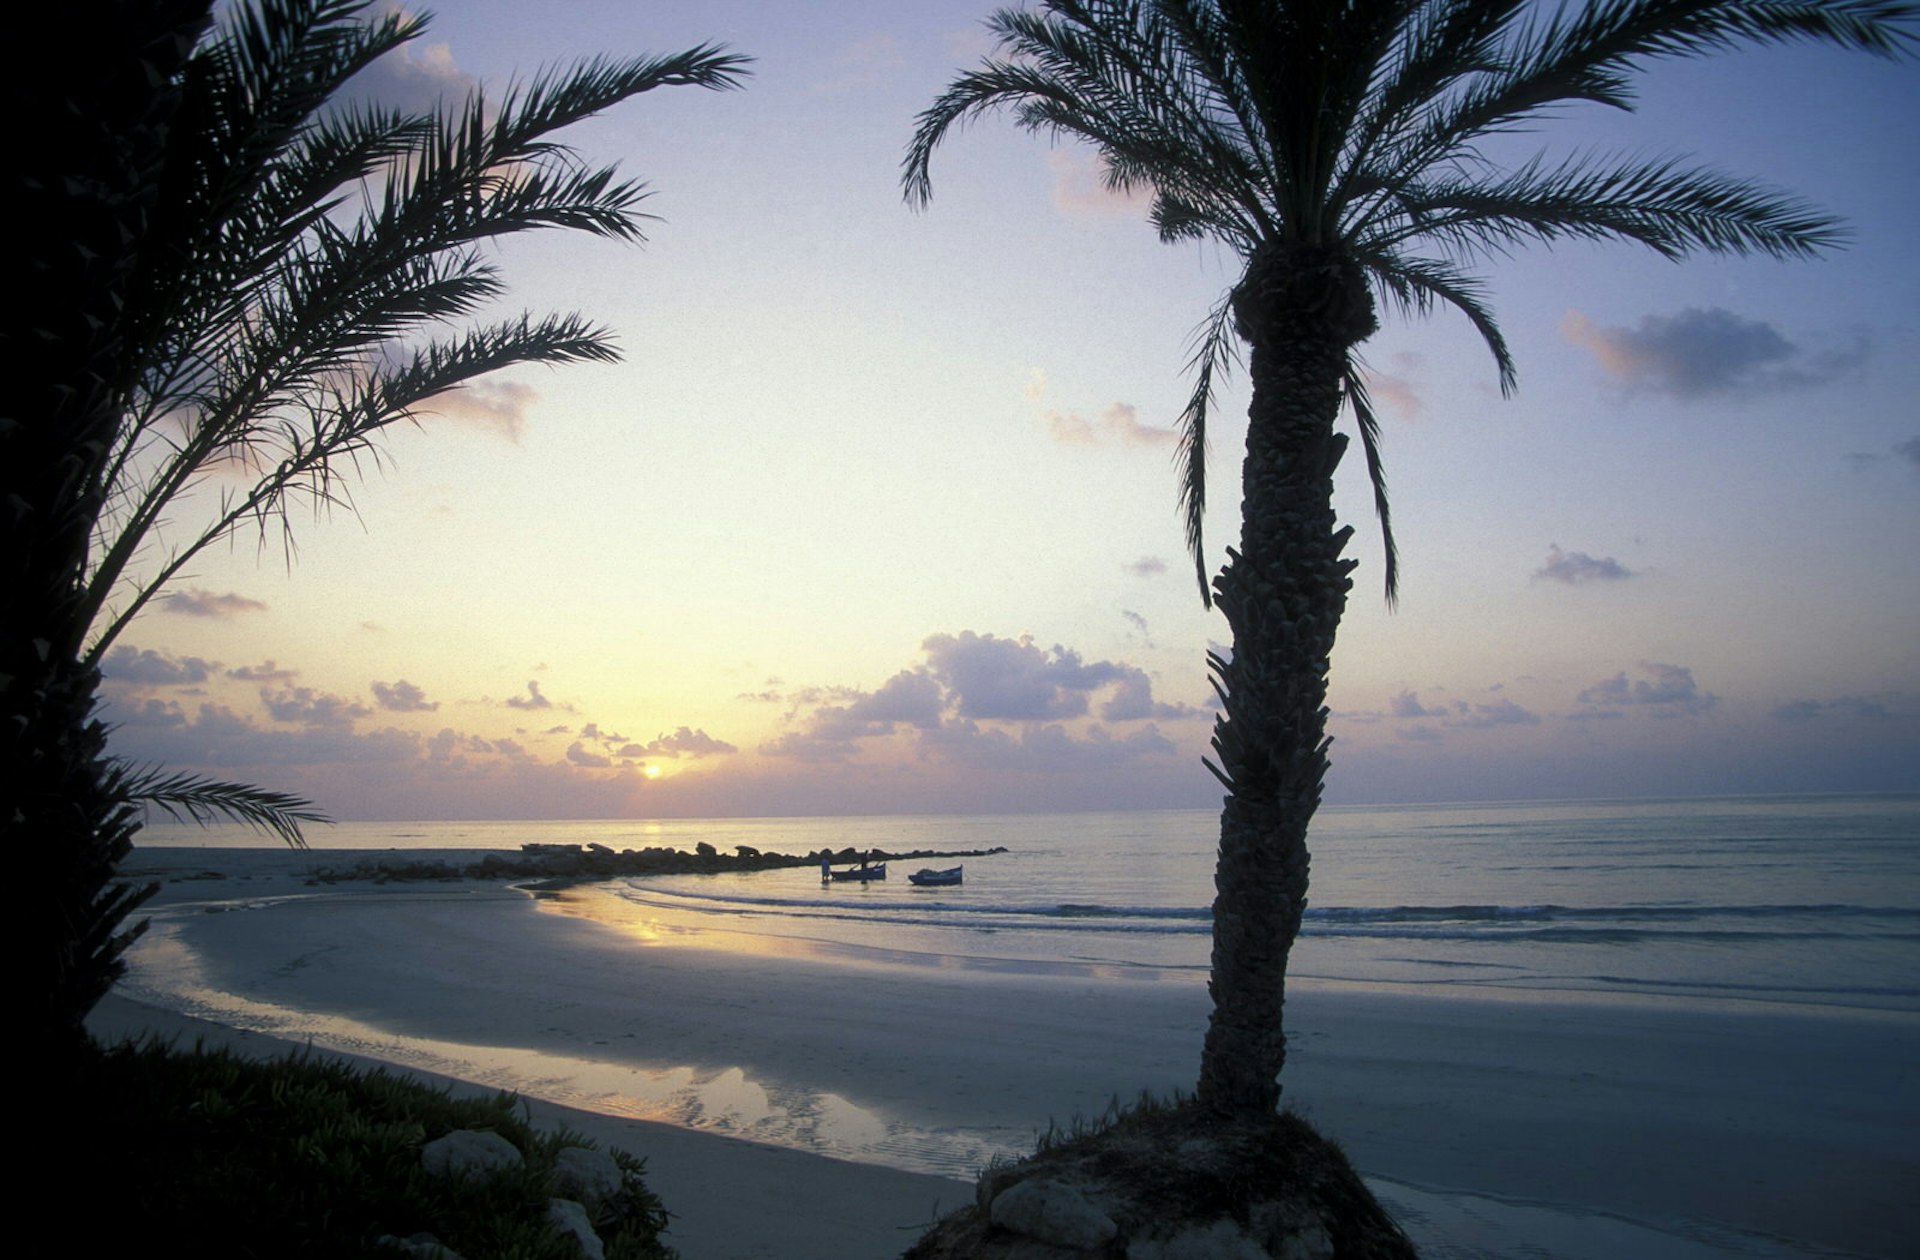 A sandy beach on the island of Djerba in southern Tunisia. Image by urf / Getty Images